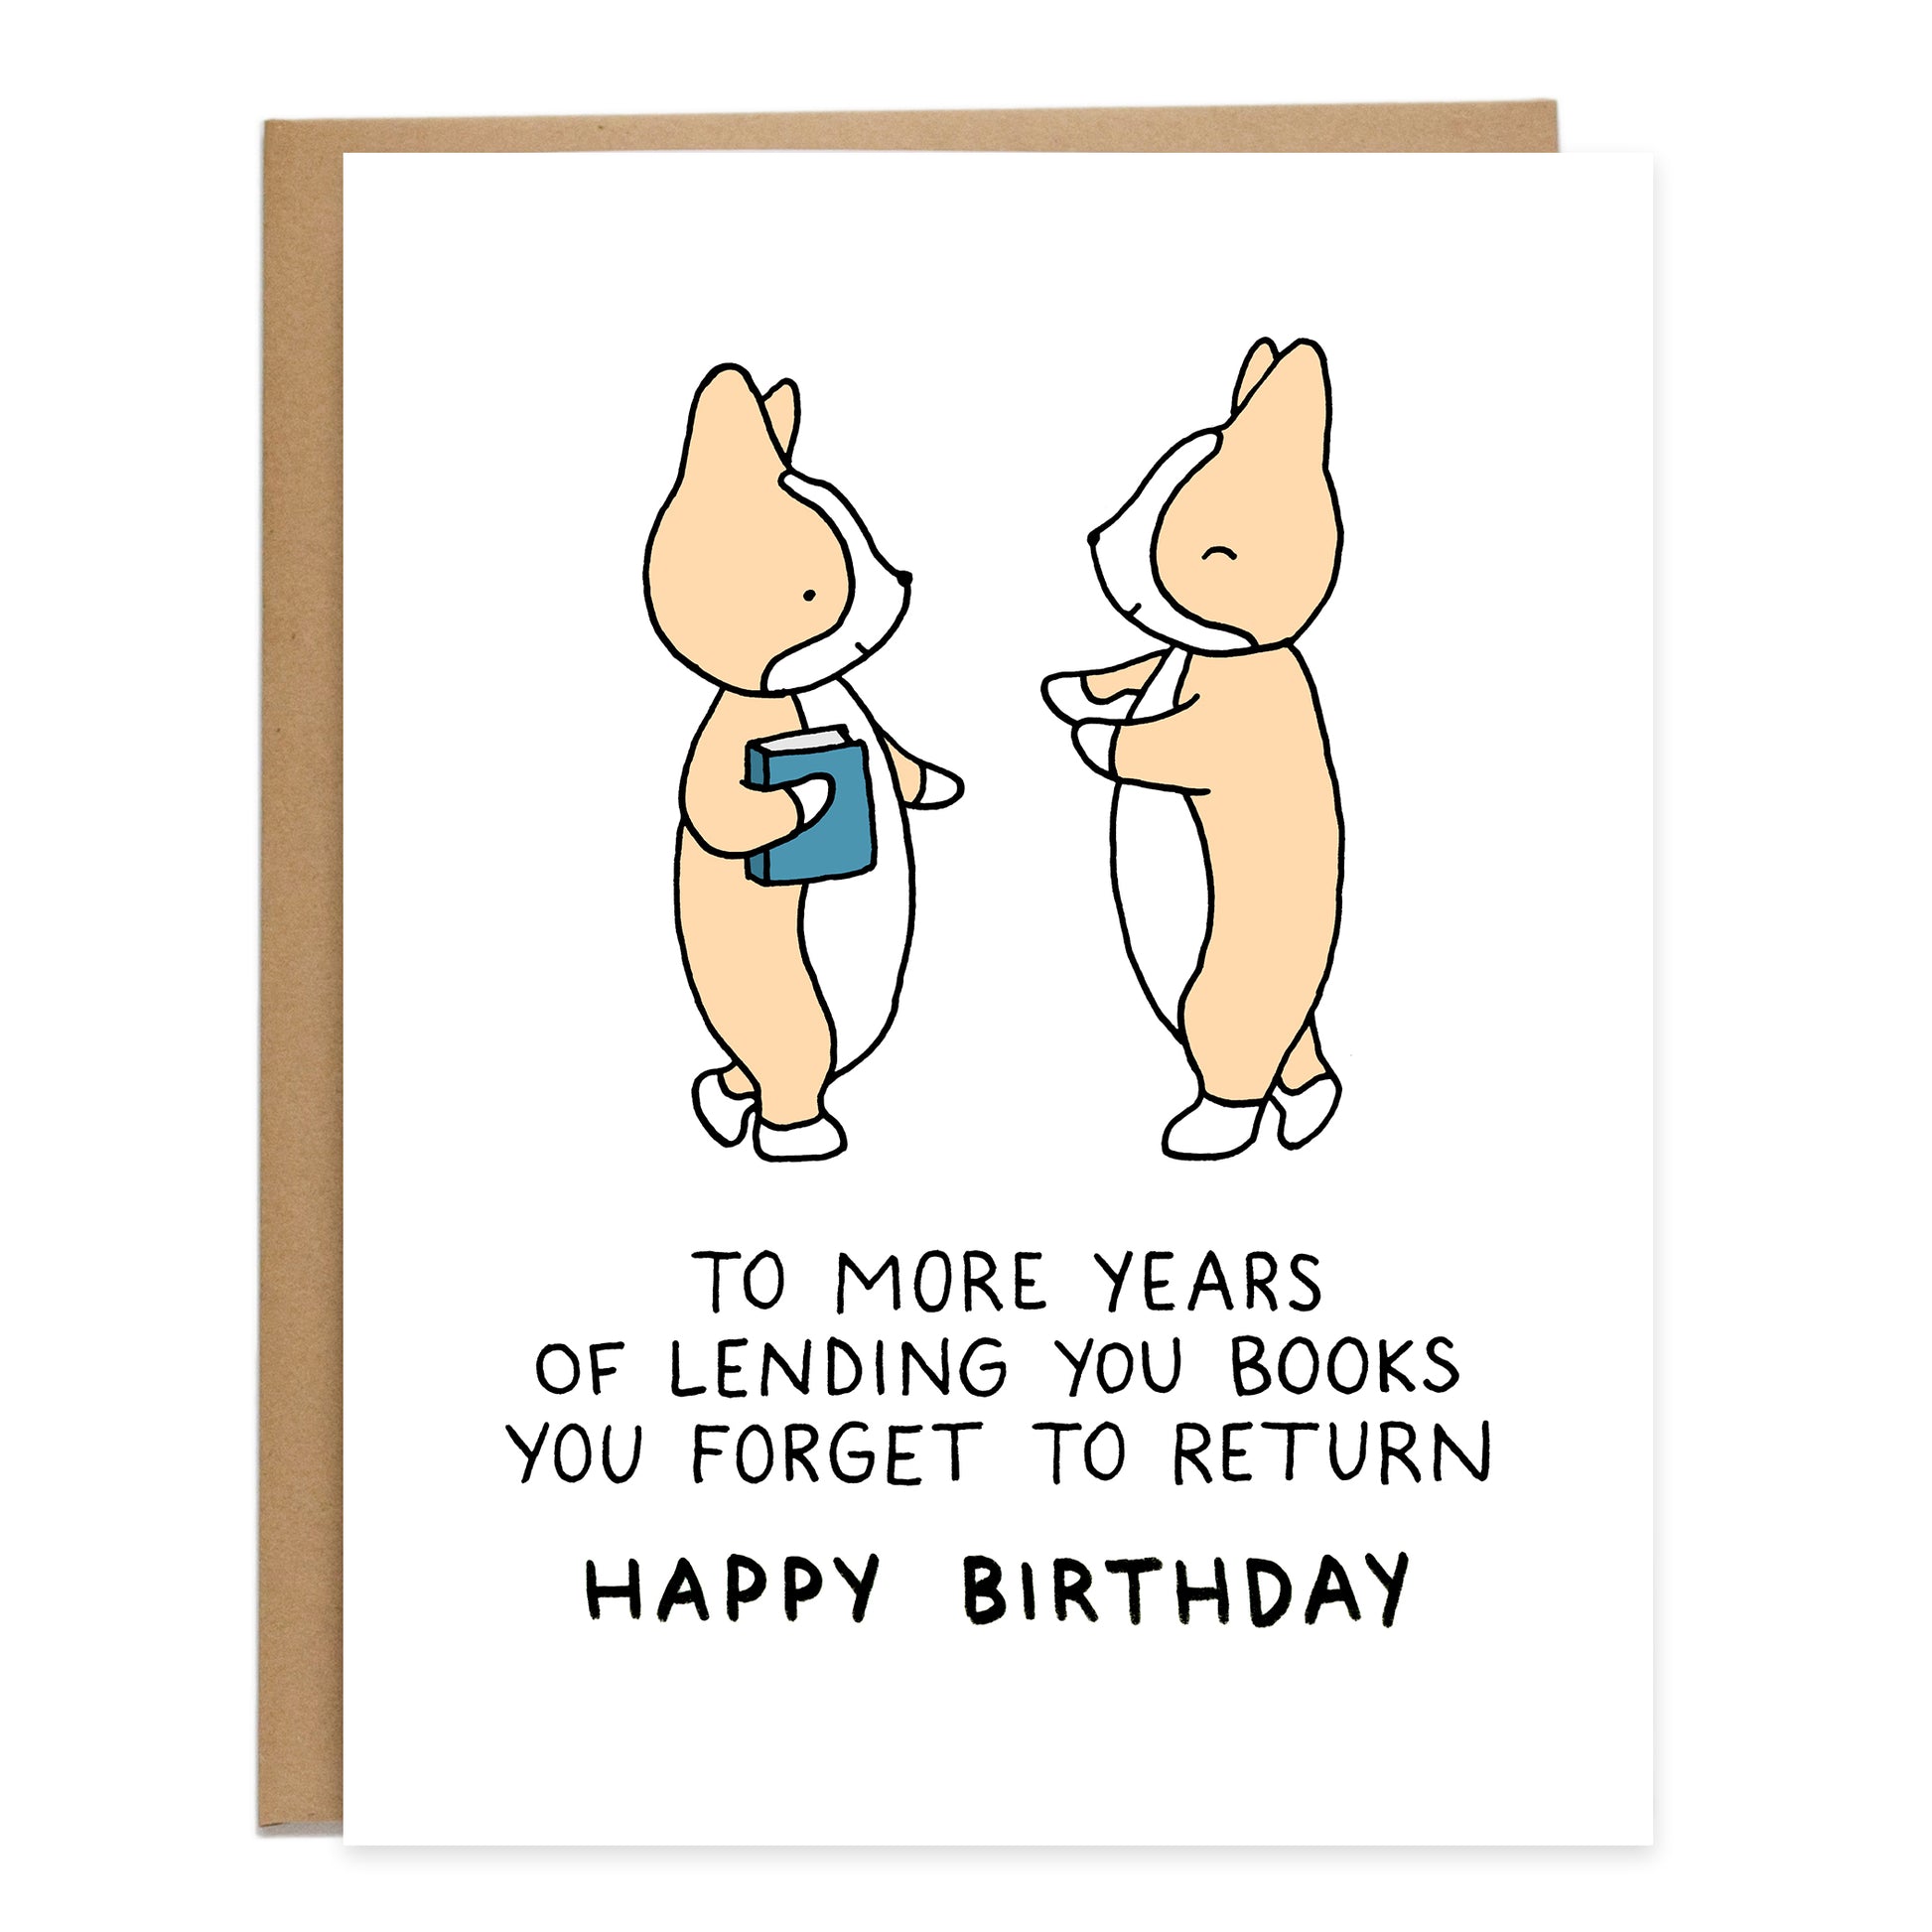 one corgi holding a book and another running towards them, text on card reads: to more years of lending you books you forget to return, happy birthday